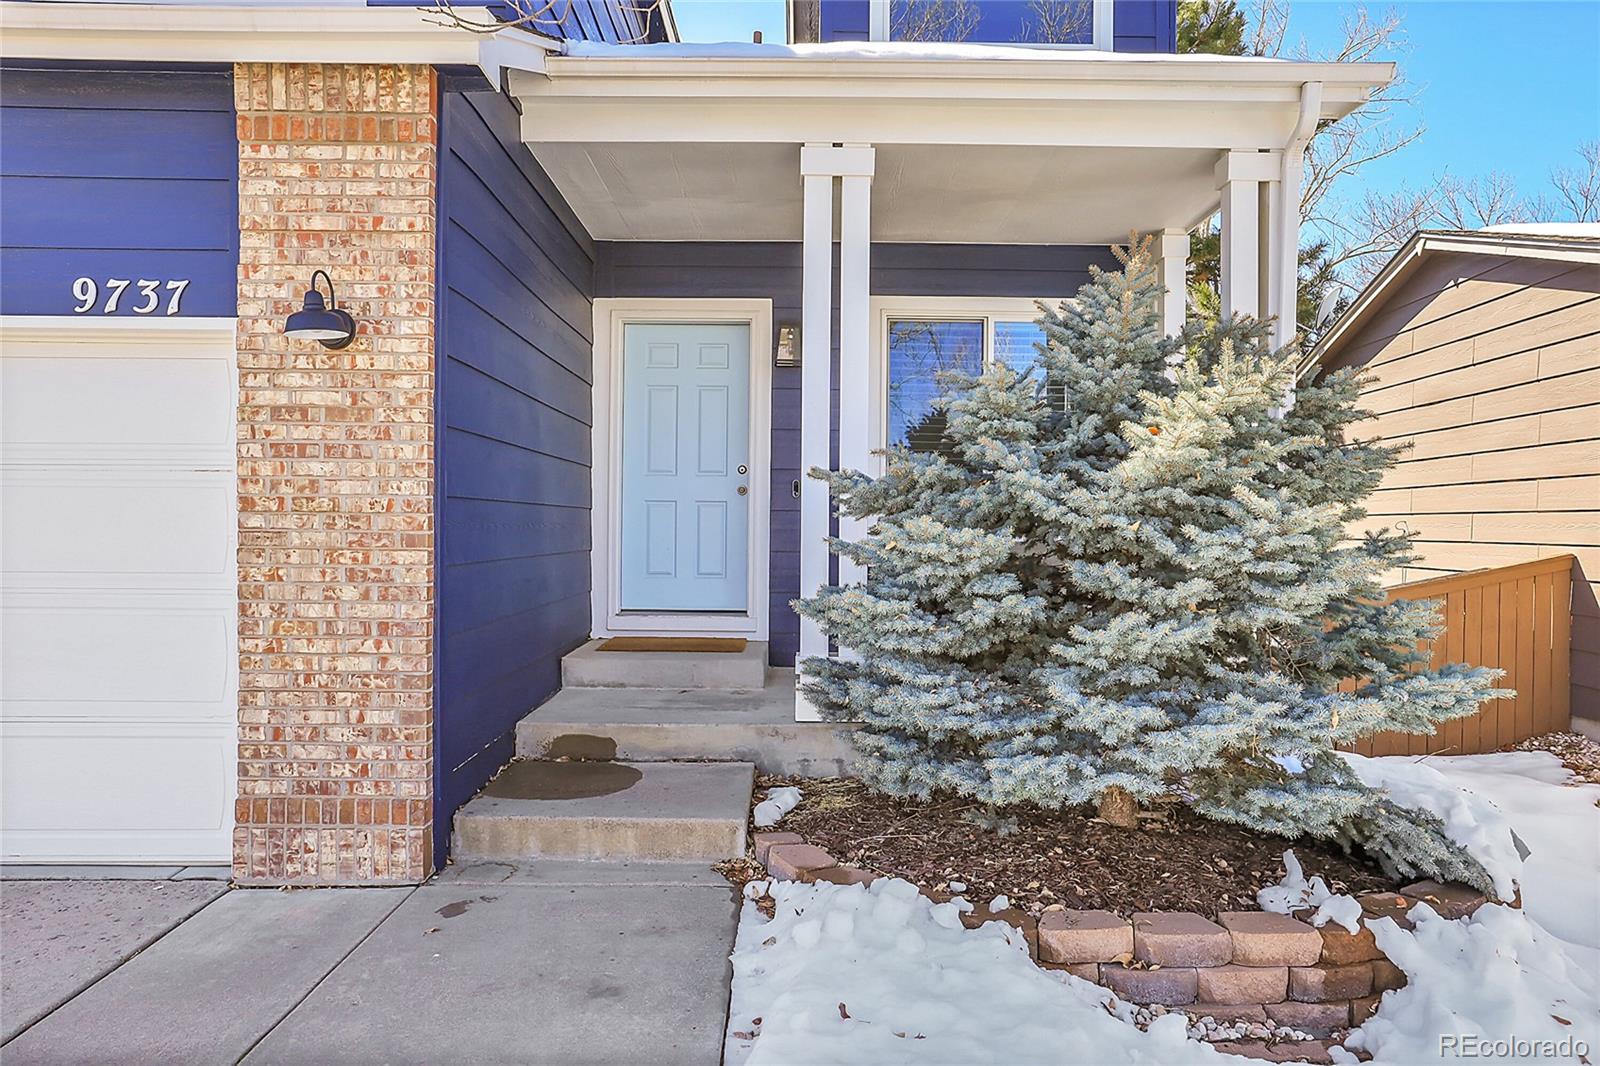 Report Image for 9737  Autumnwood Place,Highlands Ranch, Colorado